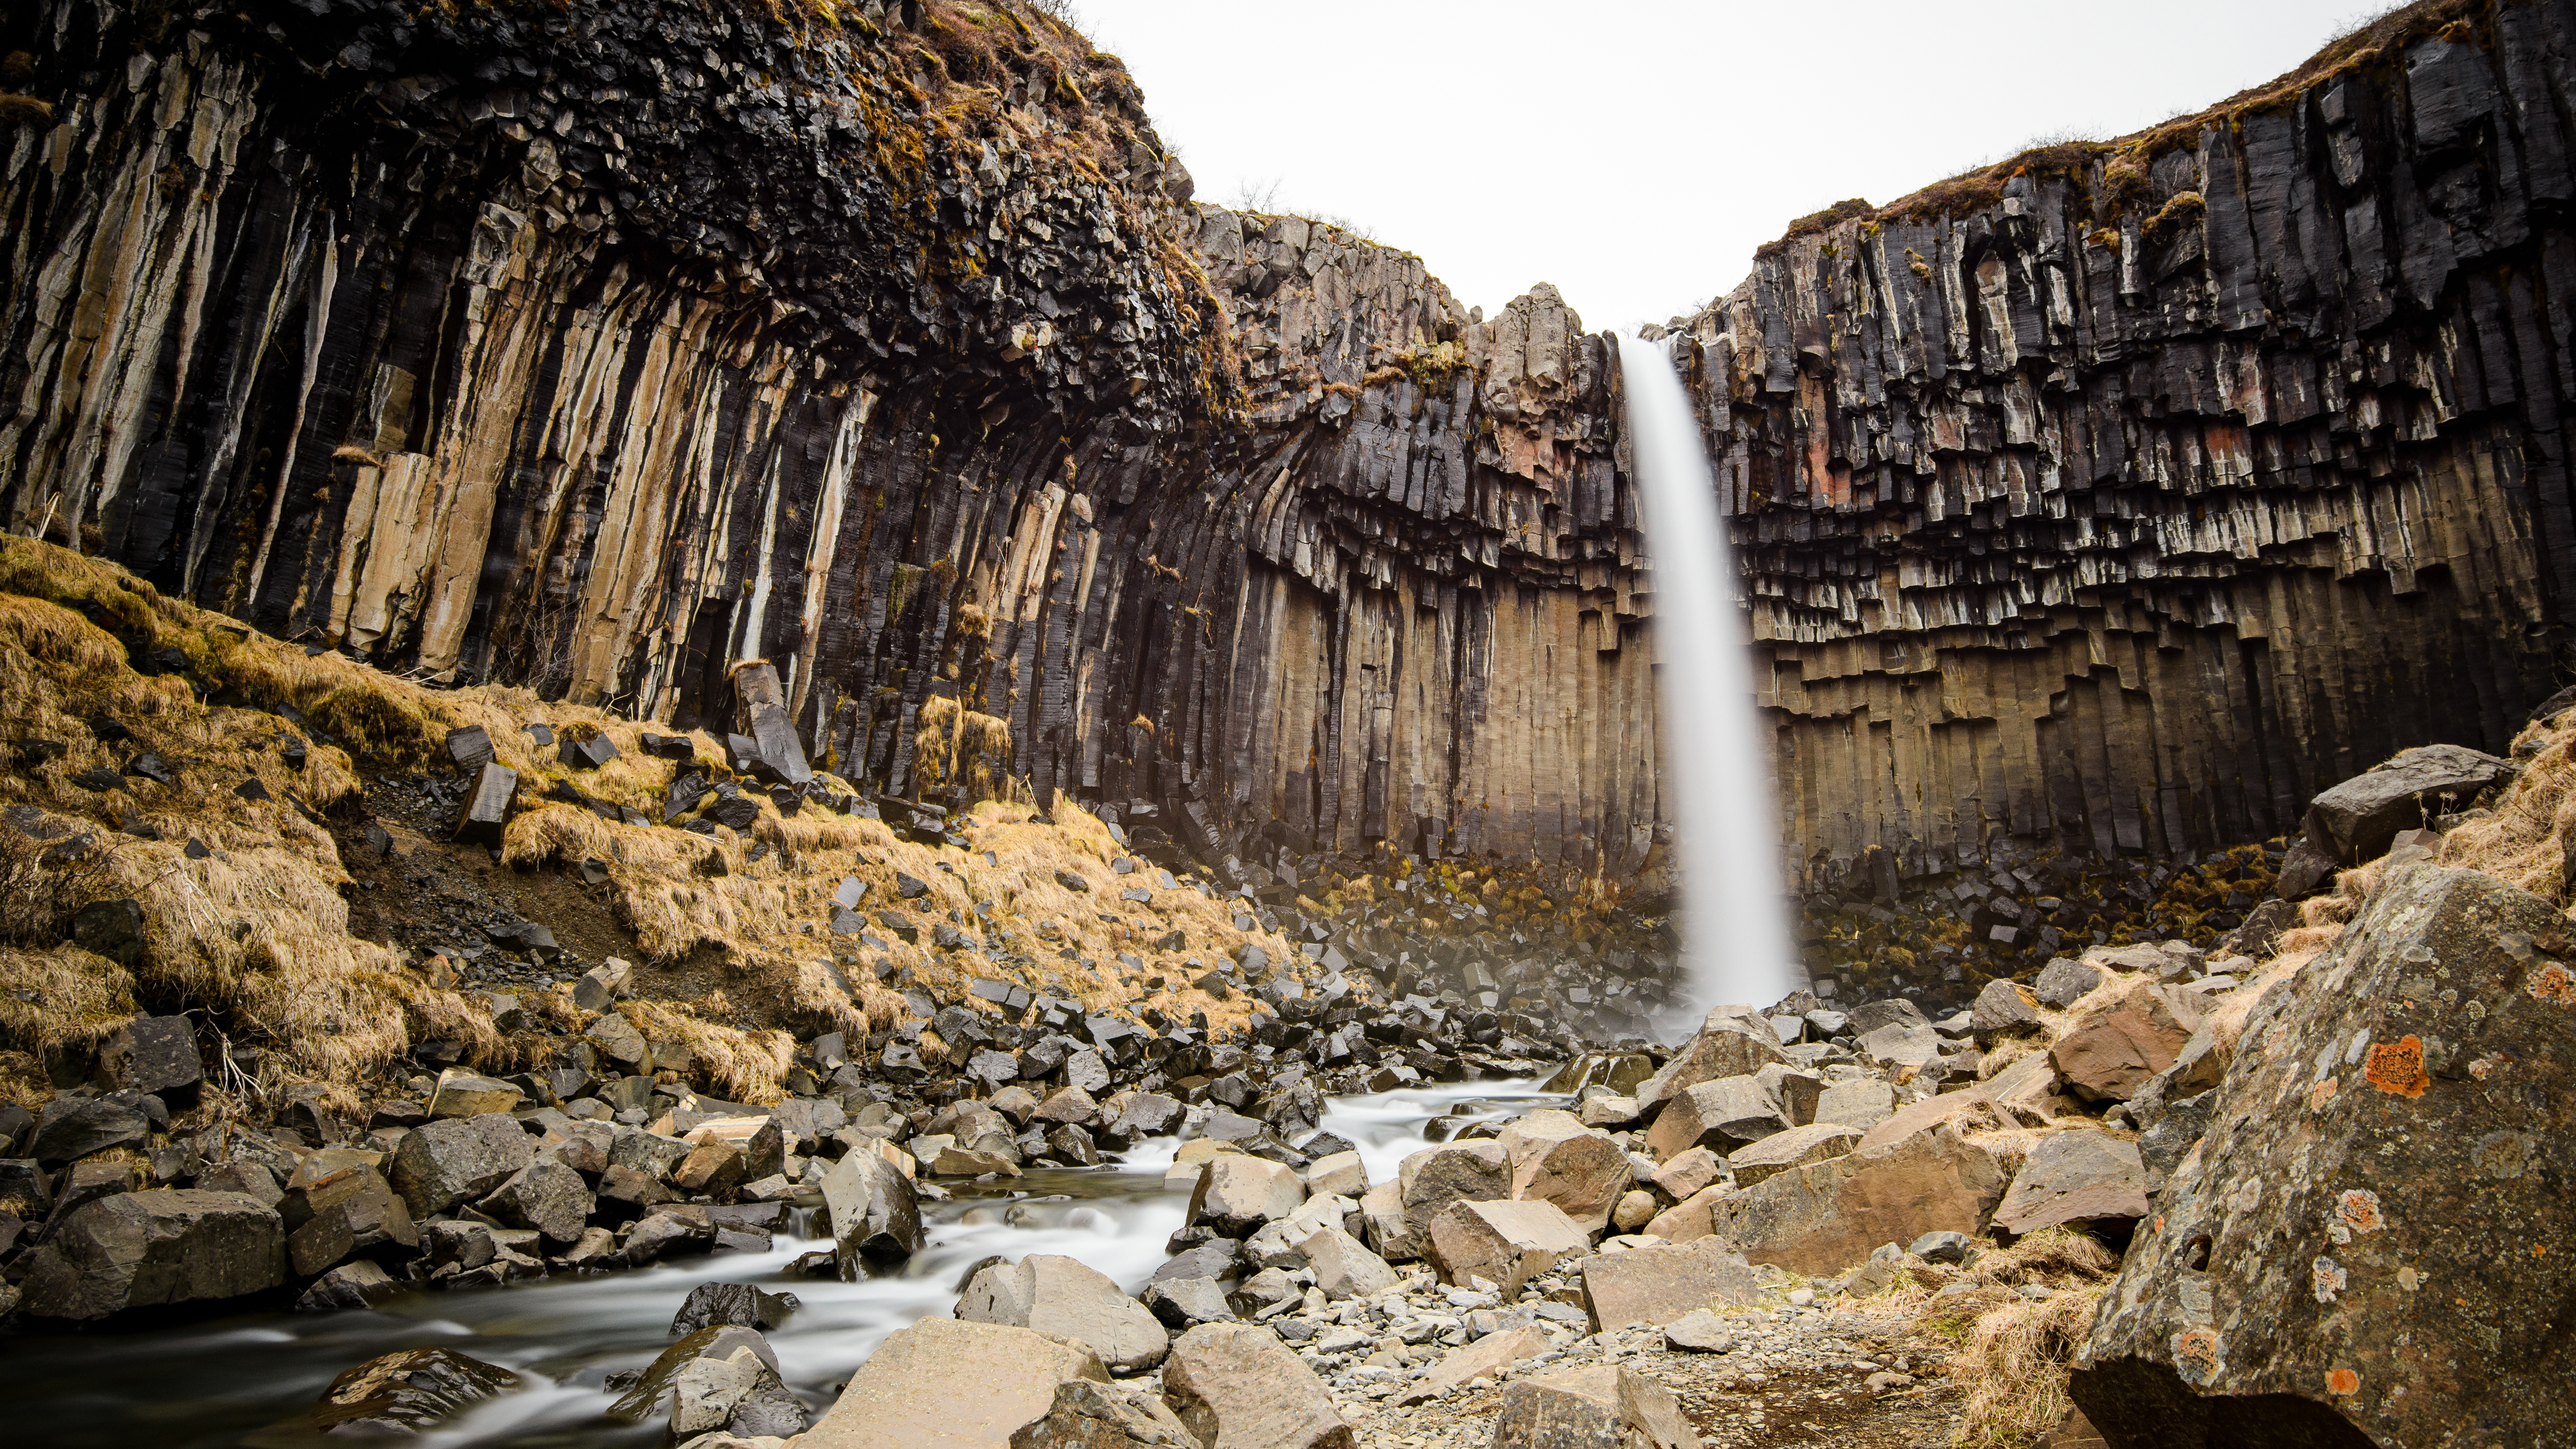 General 5120x2880 Svartifoss Waterfall Iceland landscape waterfall nature nordic landscapes long exposure photography